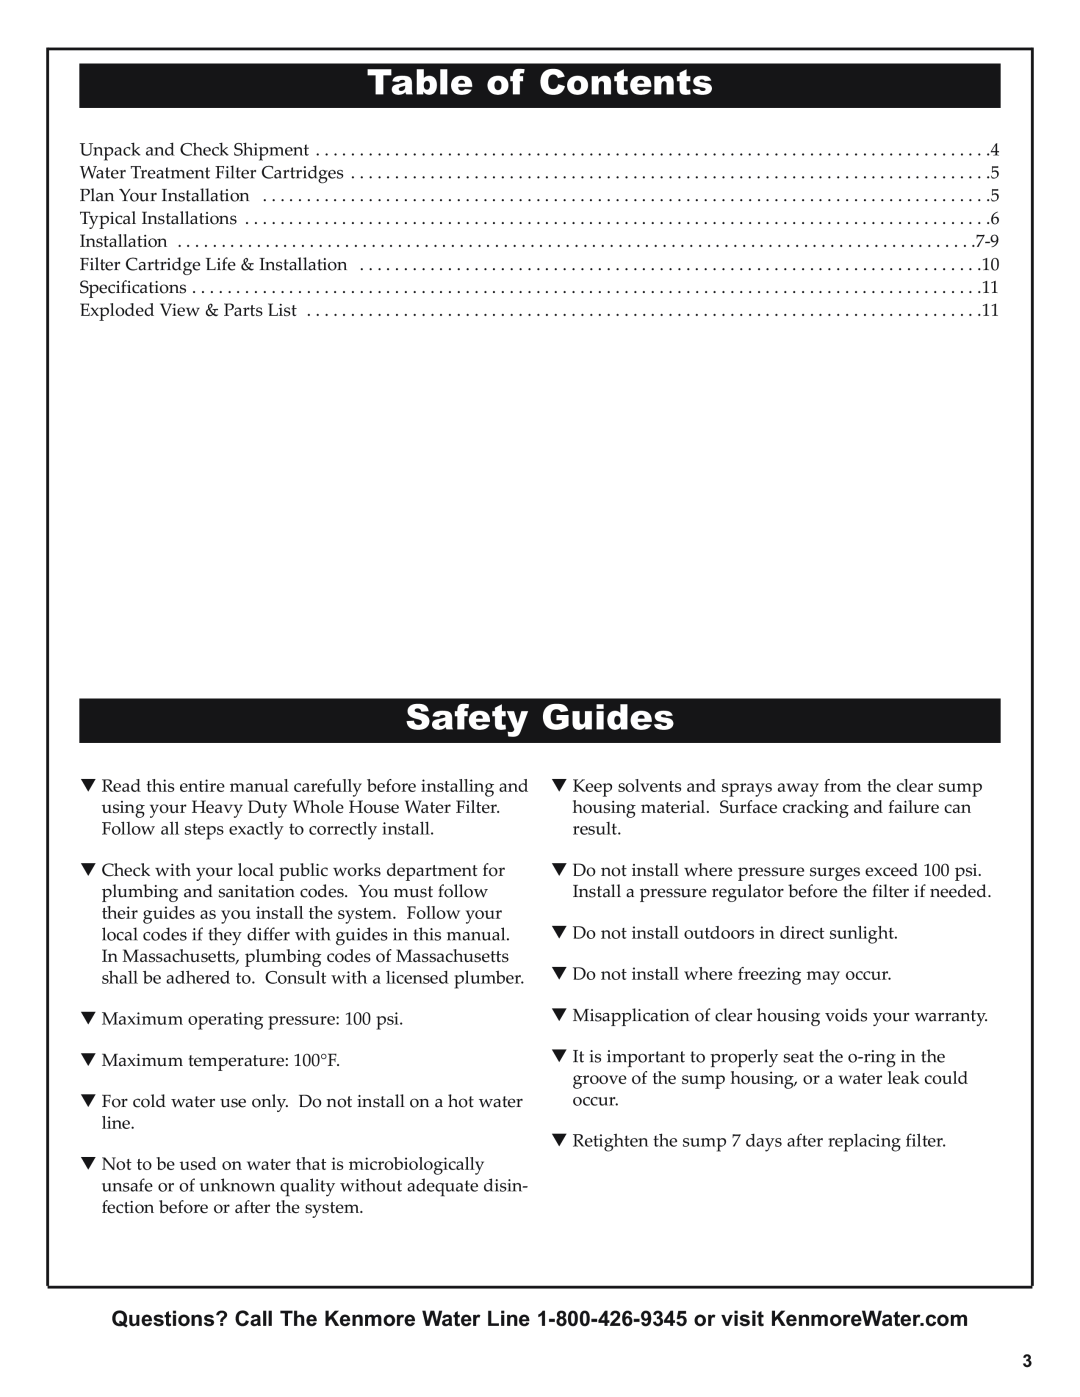 Kenmore 625.38448 owner manual Table of Contents, Safety Guides 